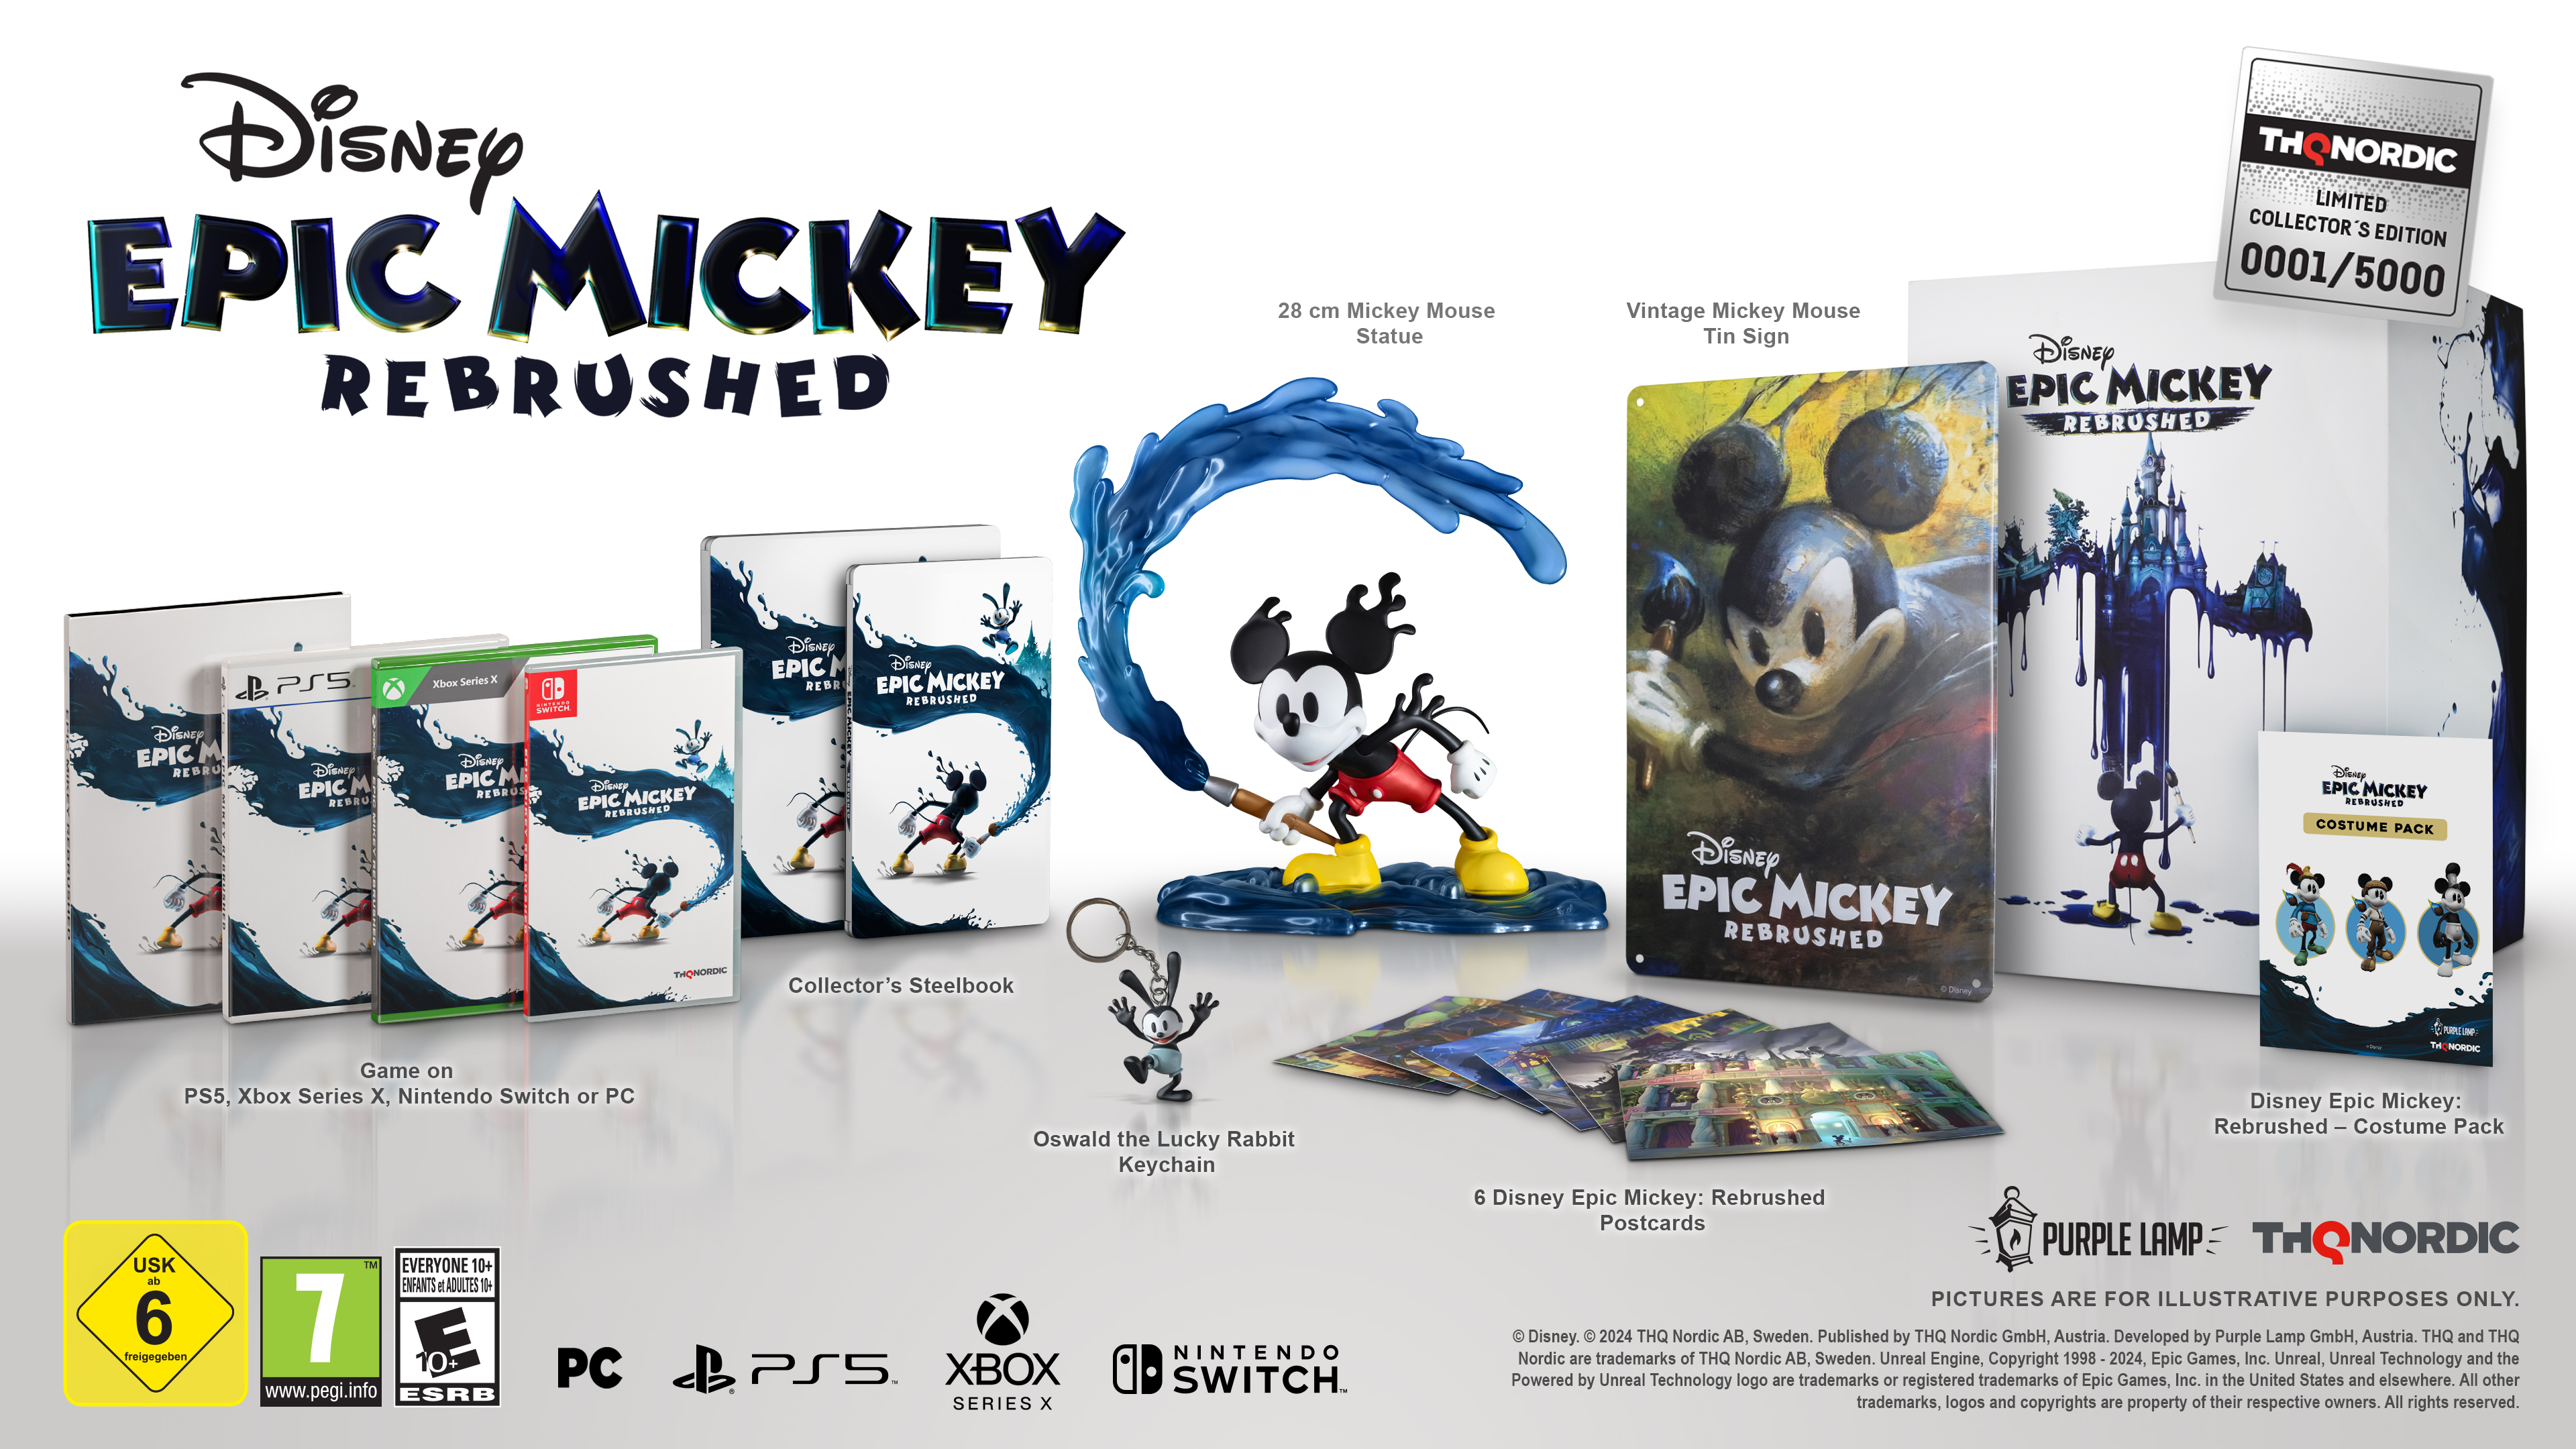 Disney Epic Mickey: Rebrushed - Collectors Edition